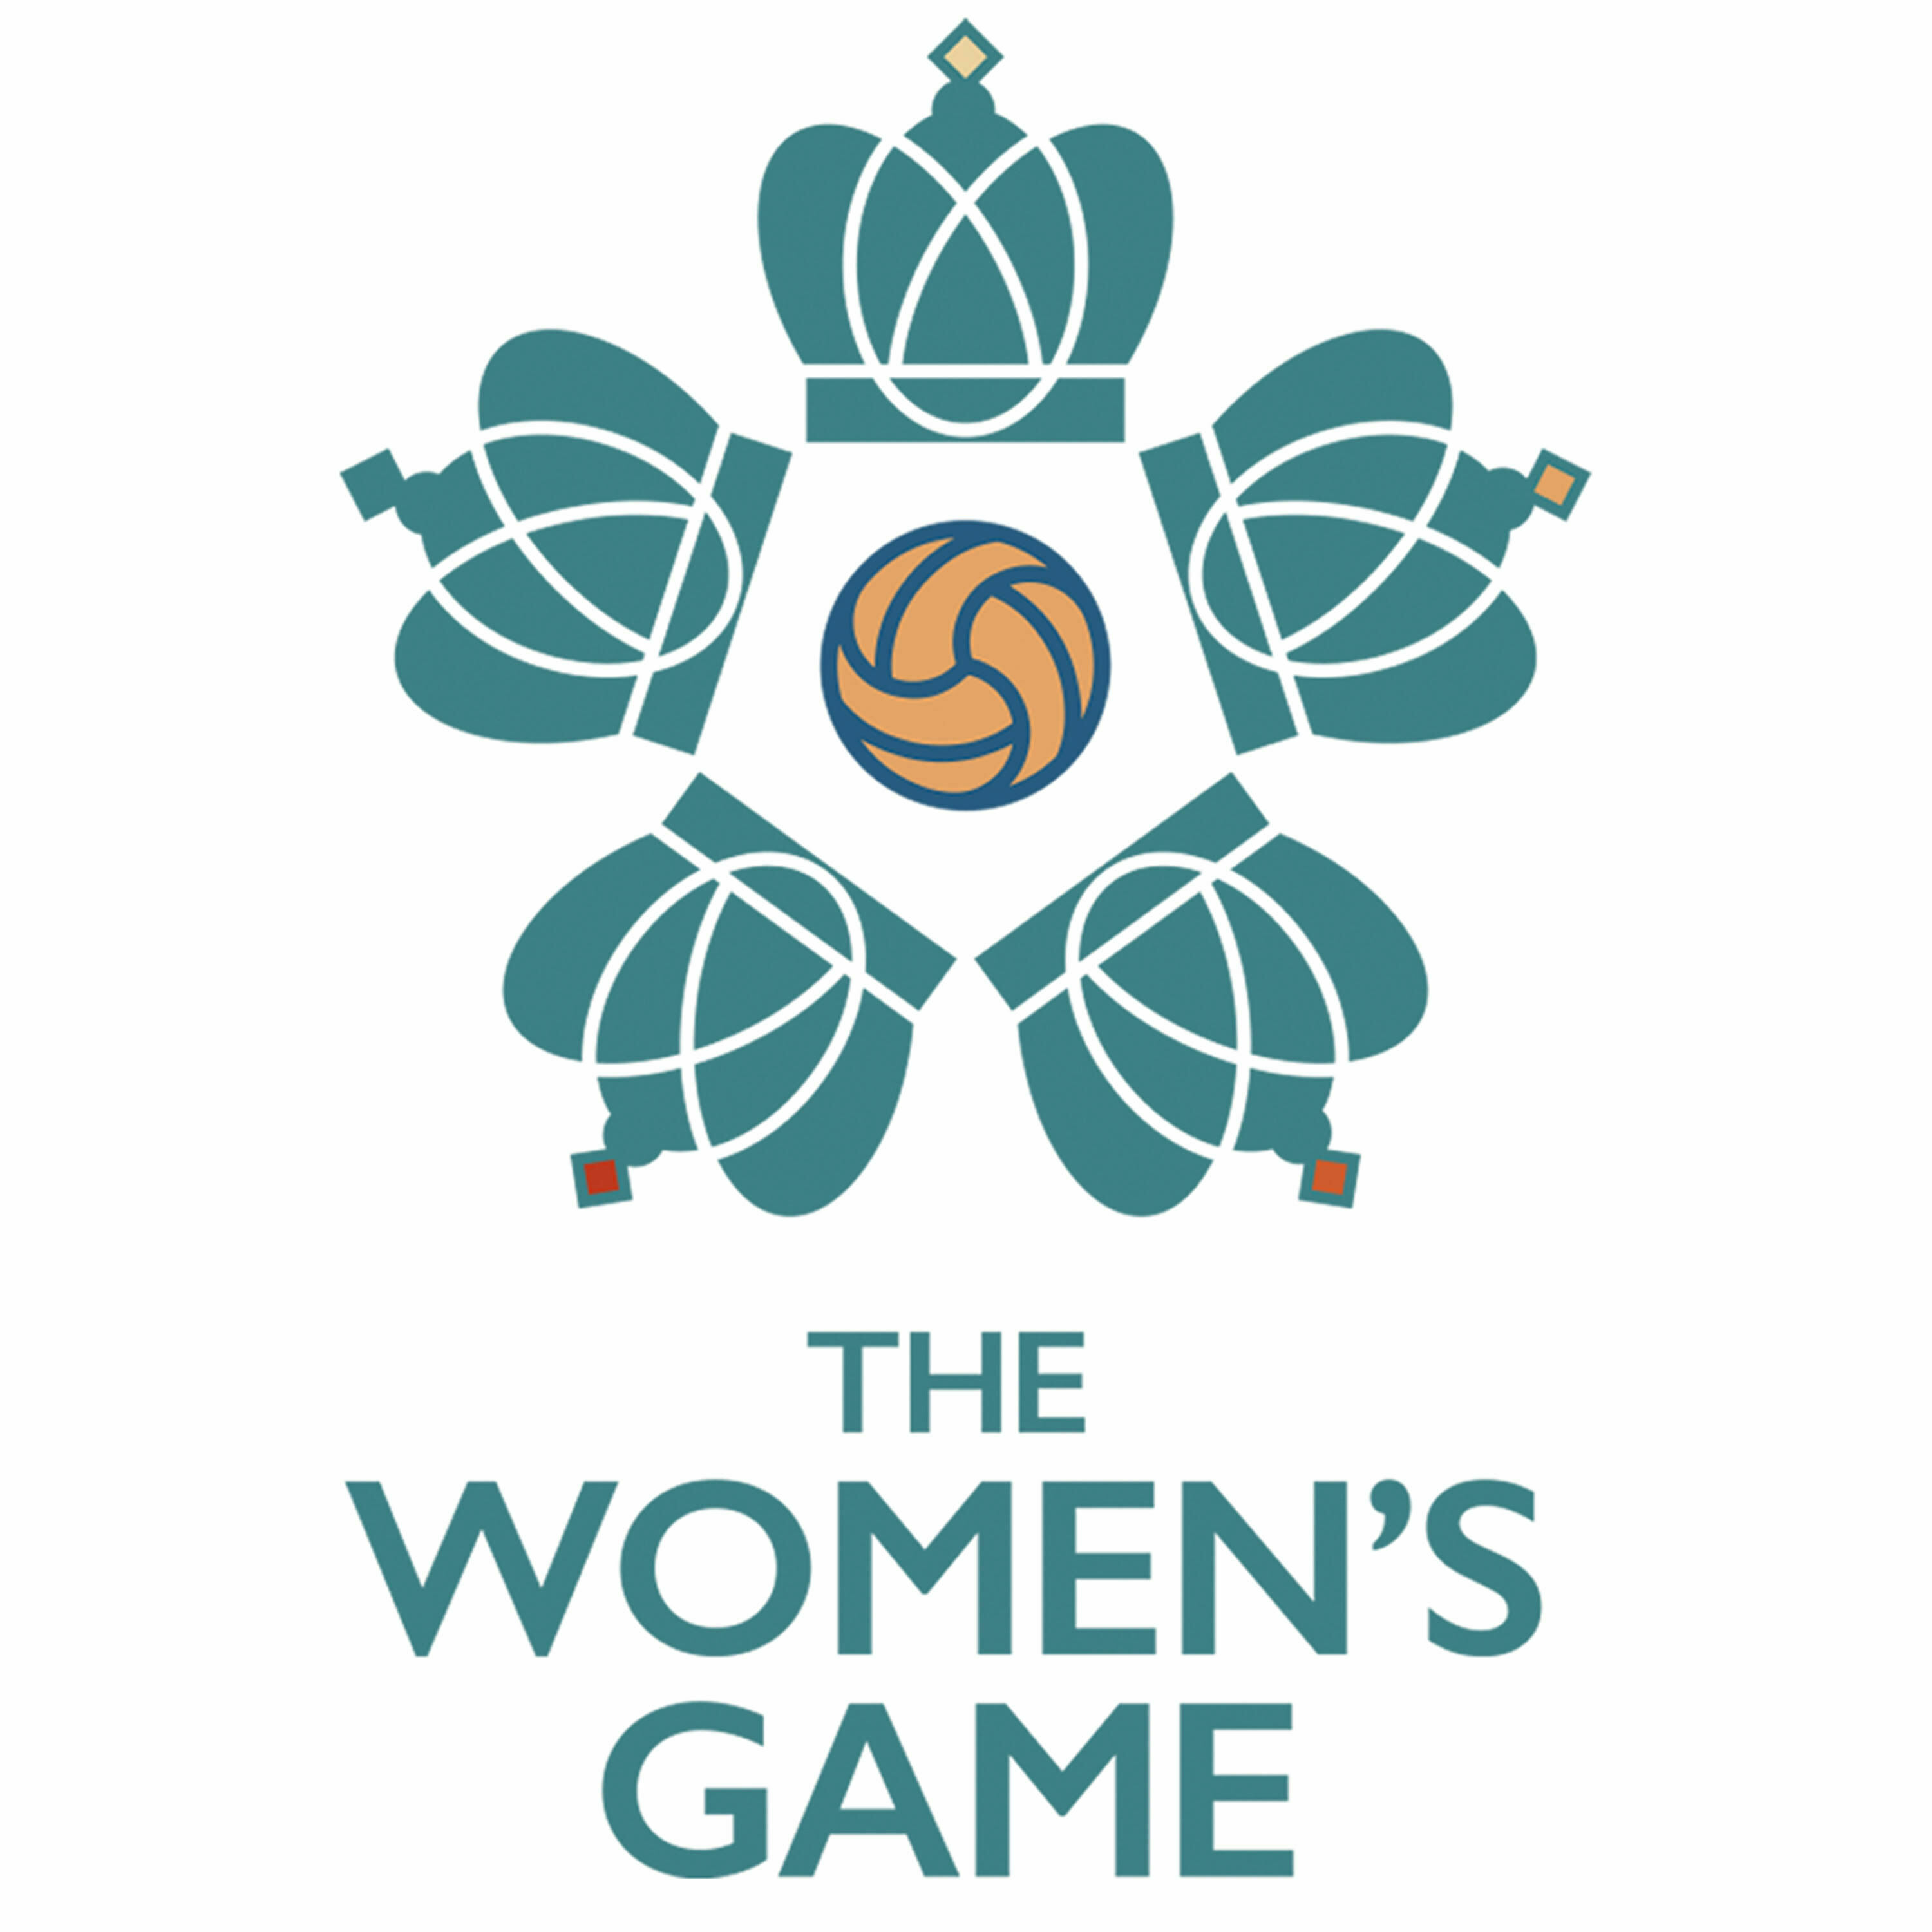 The Women's Game 09/29/22: With Trinity Rodman, Presented by Paramount +